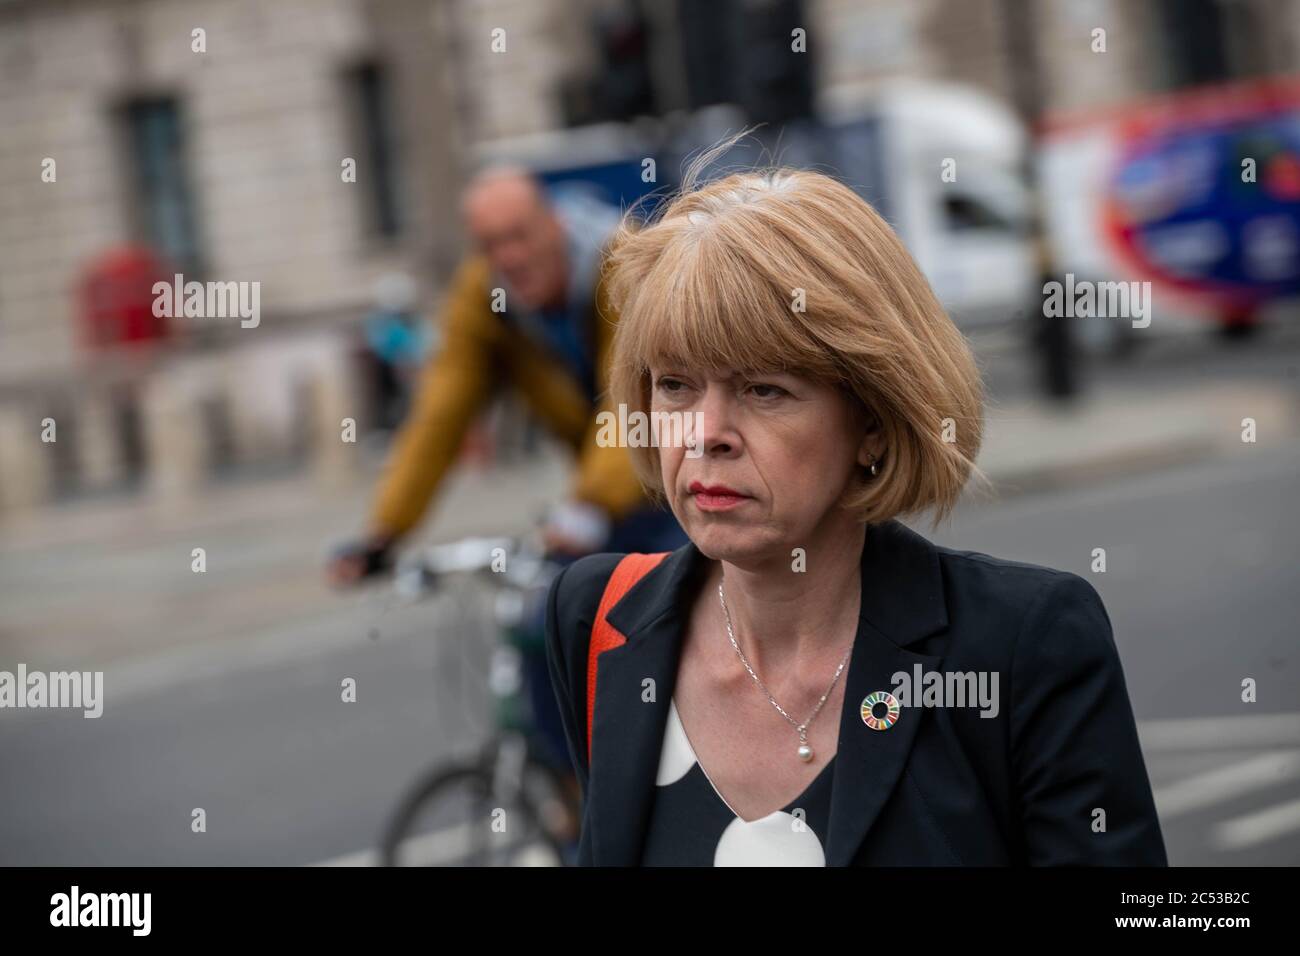 London, UK. 30th June, 2020. Wendy Morton MP, Under Secretary of State in the Foreign and Commonwealth Office and the Department for International Development Credit: Ian Davidson/Alamy Live News Stock Photo